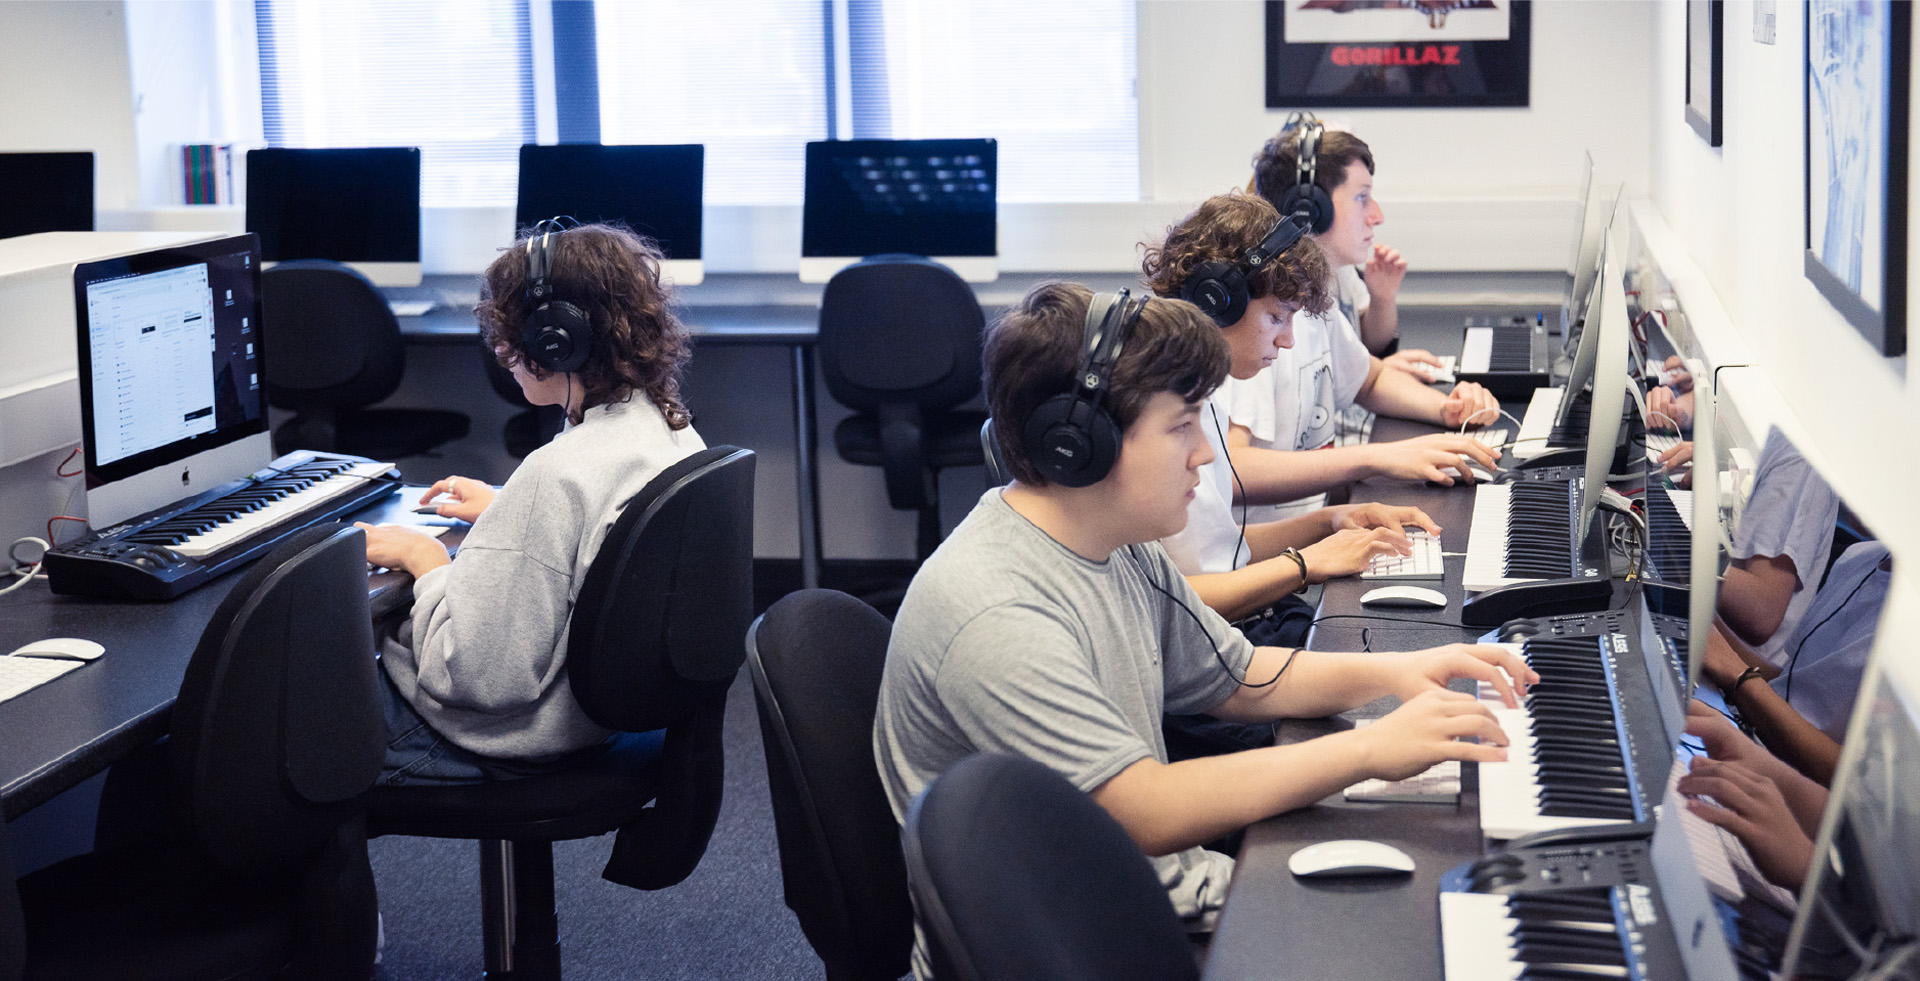 Group of males working at computers with MIDI keyboards